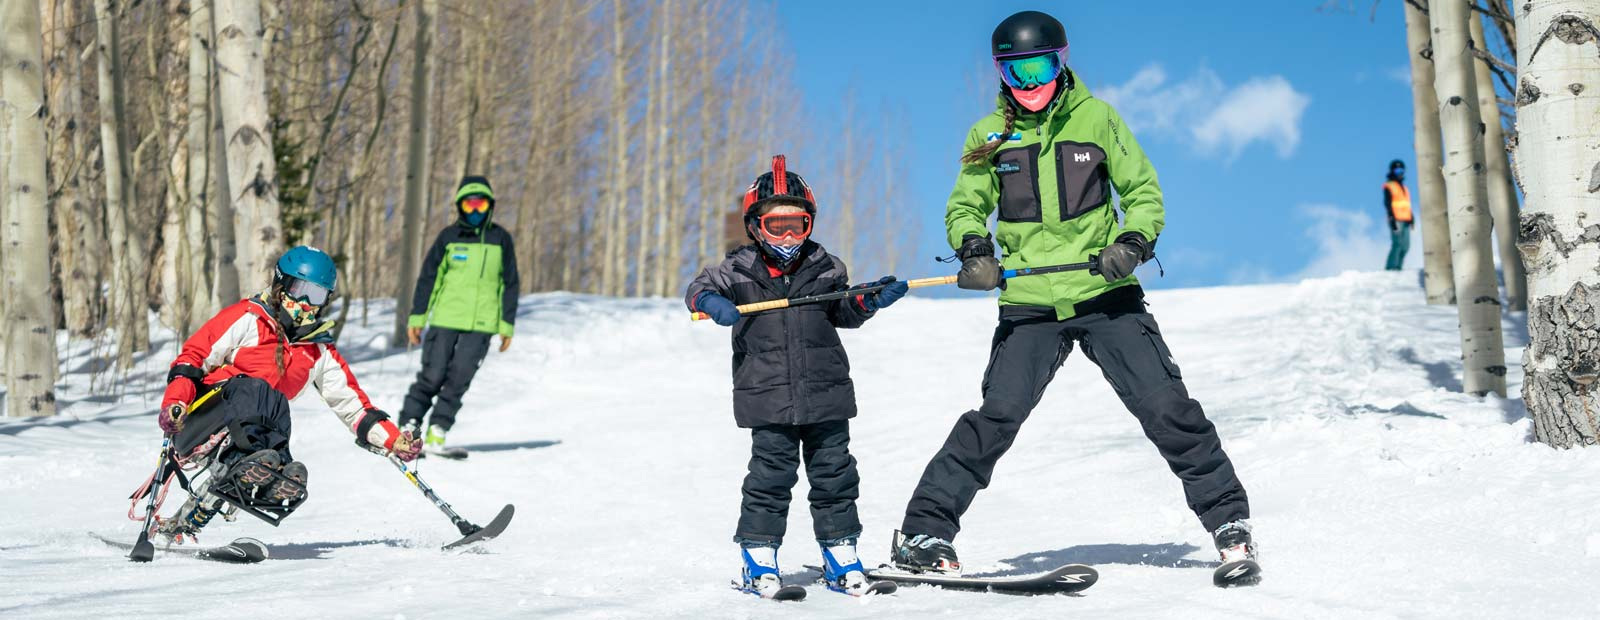 Family skiing together